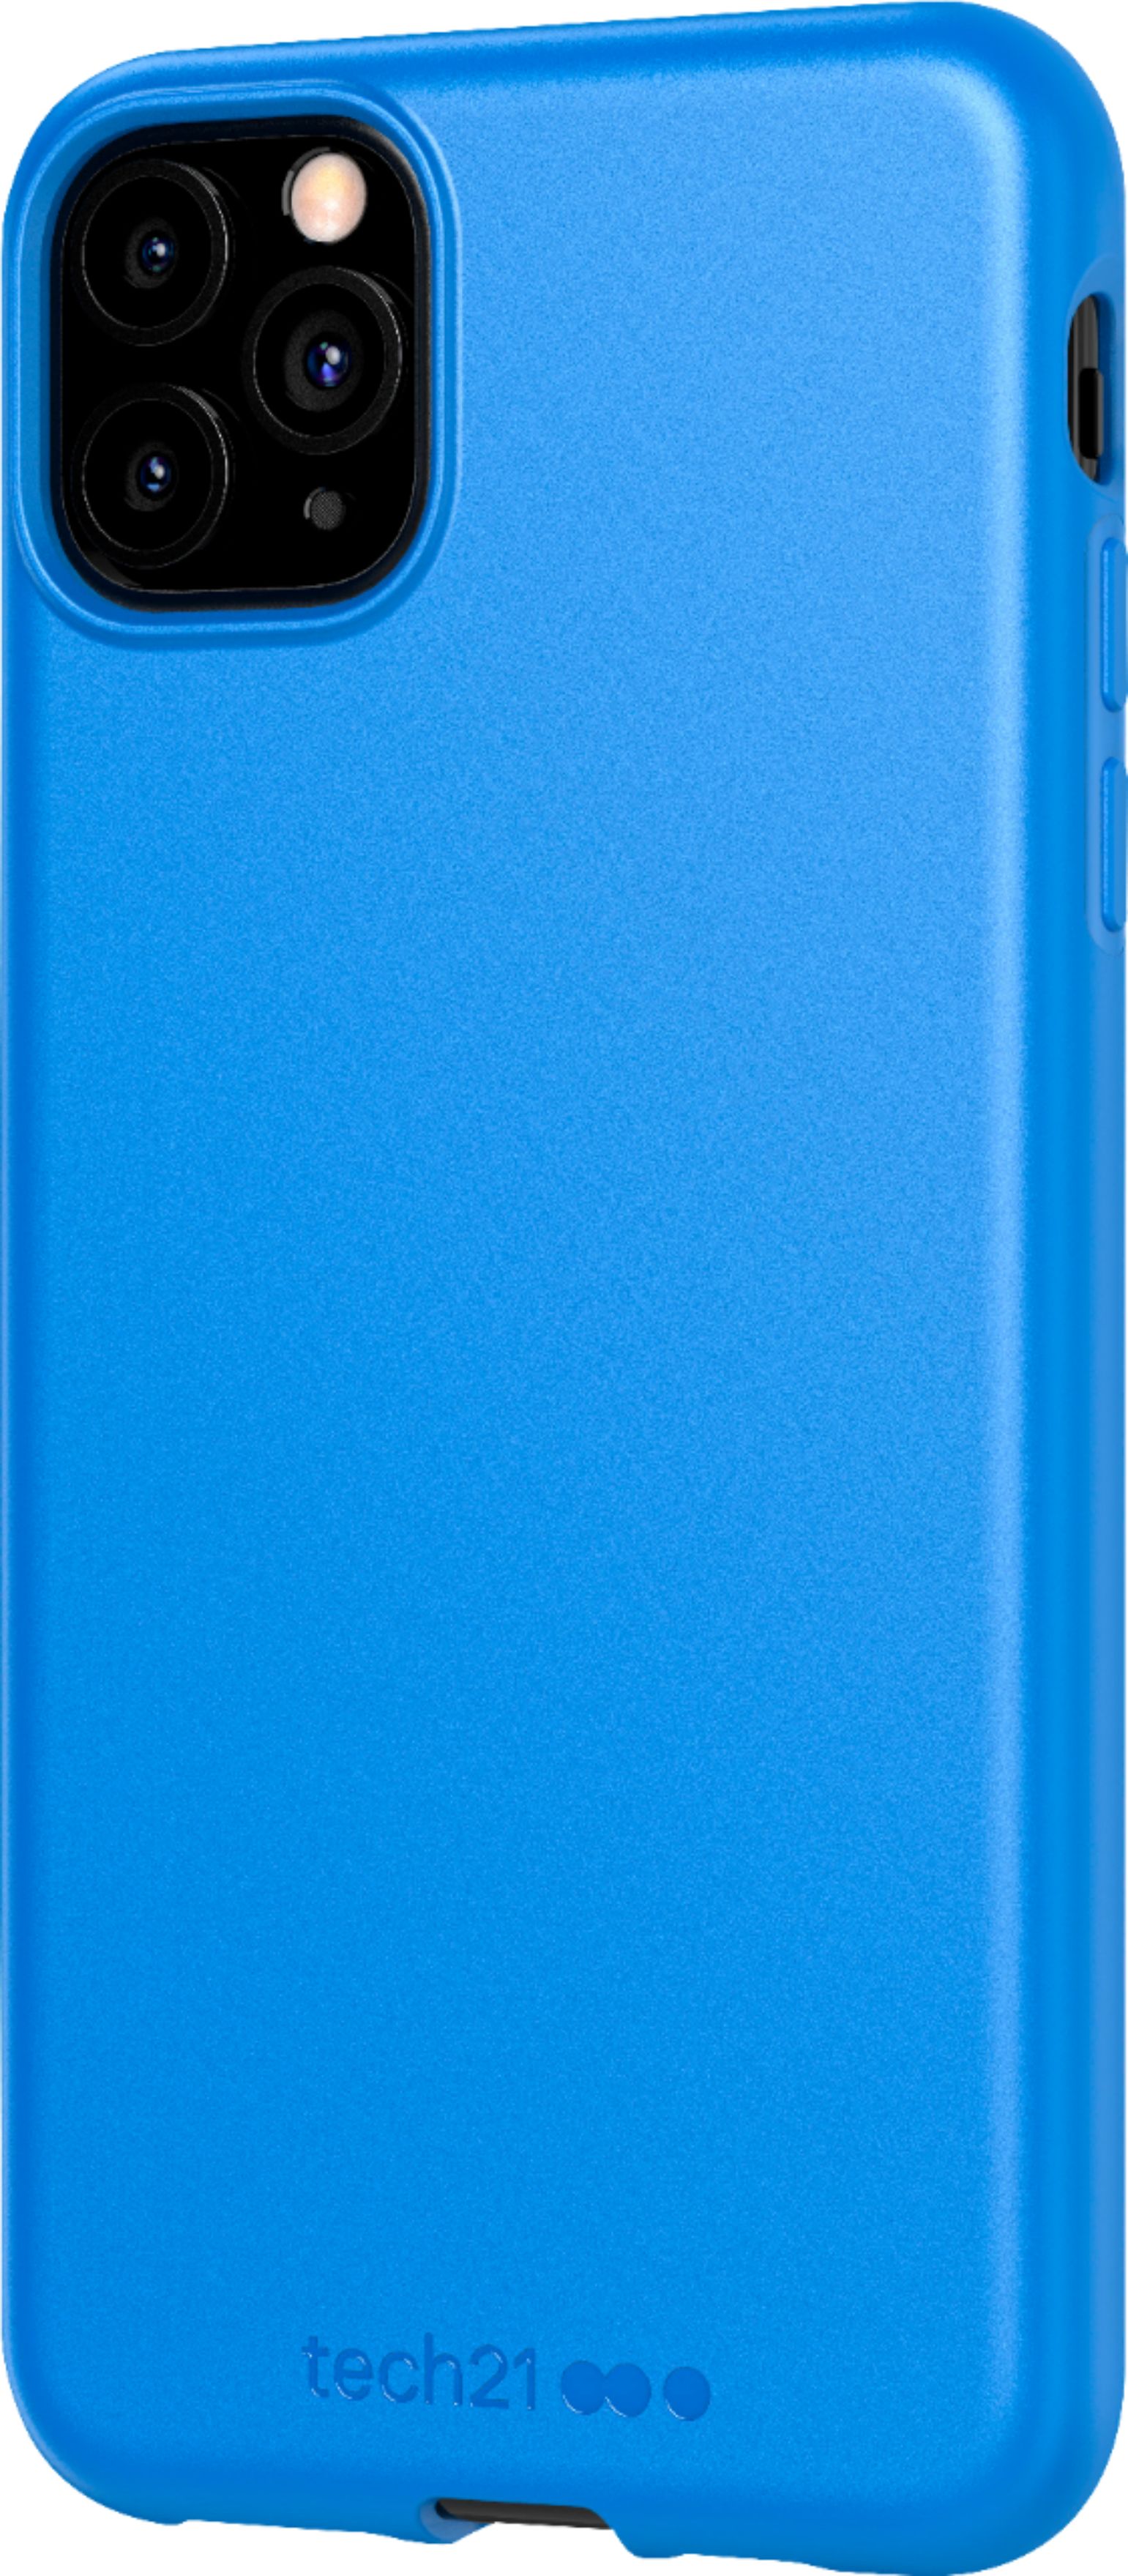 Tech21 Studio Colour Case For Apple Iphone 11 Pro Max Bolt From The Blue bbr Best Buy